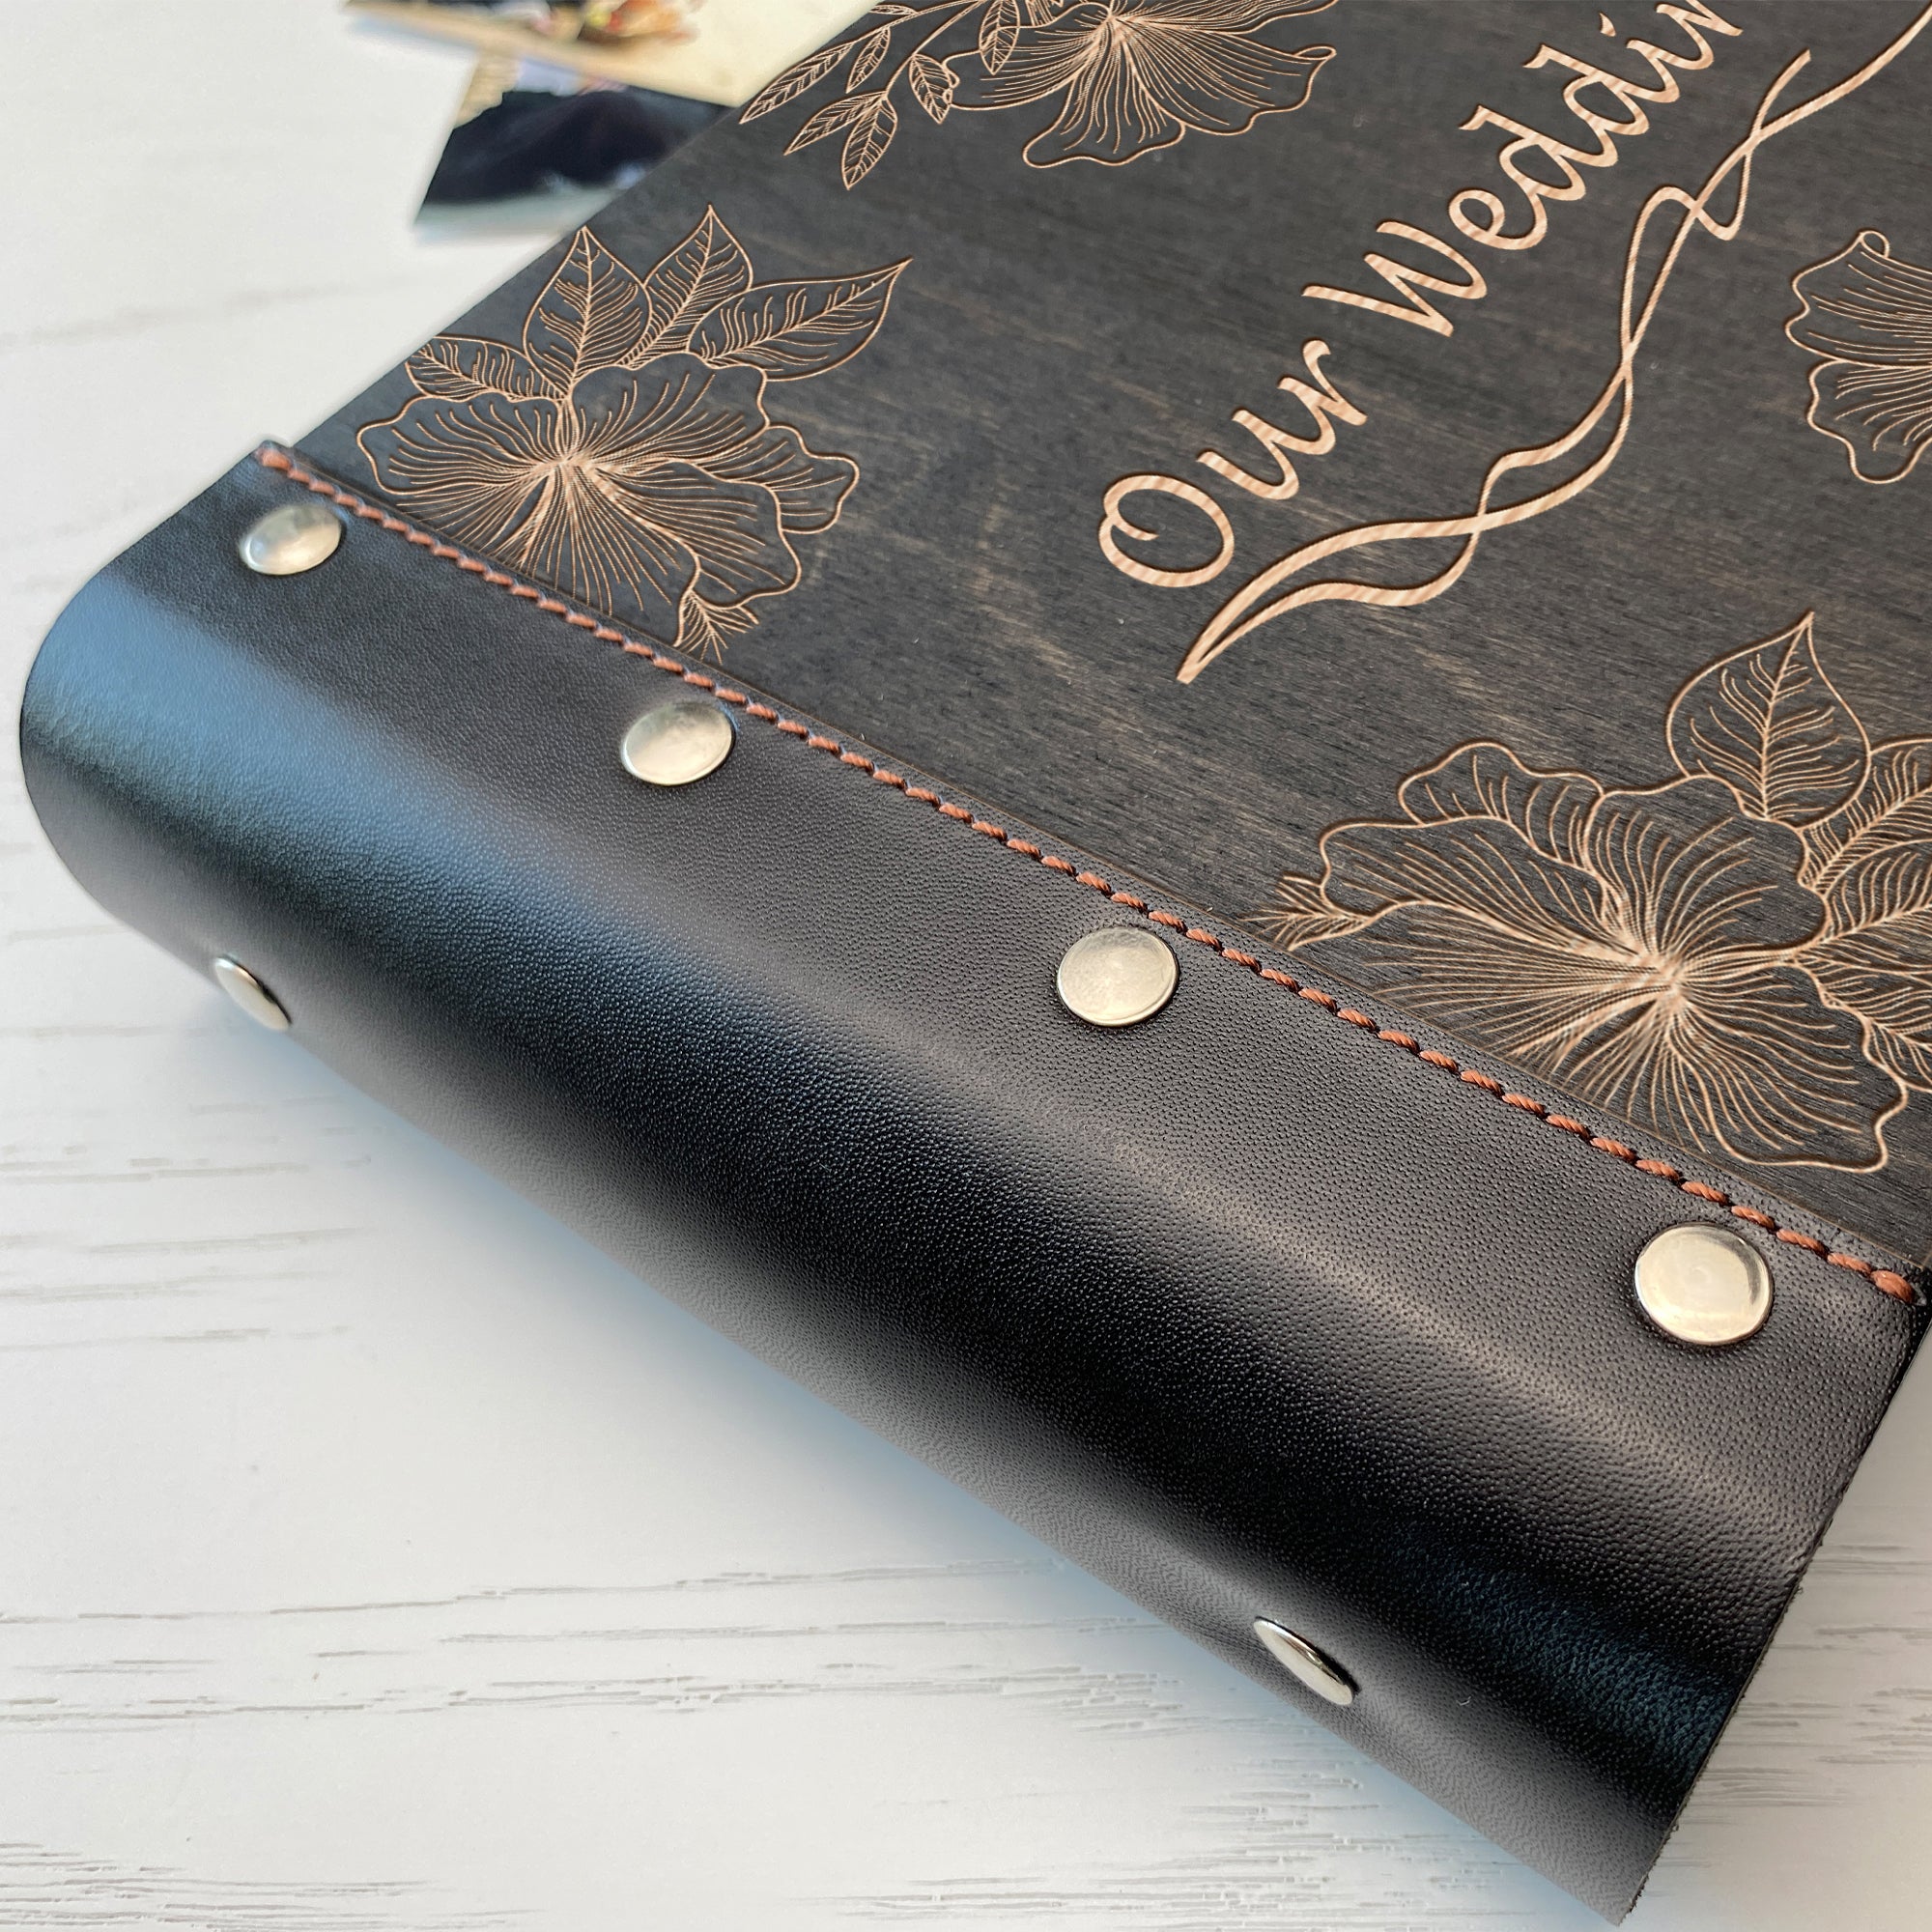 Personalized photo album with leather cover and Magnolias engraving